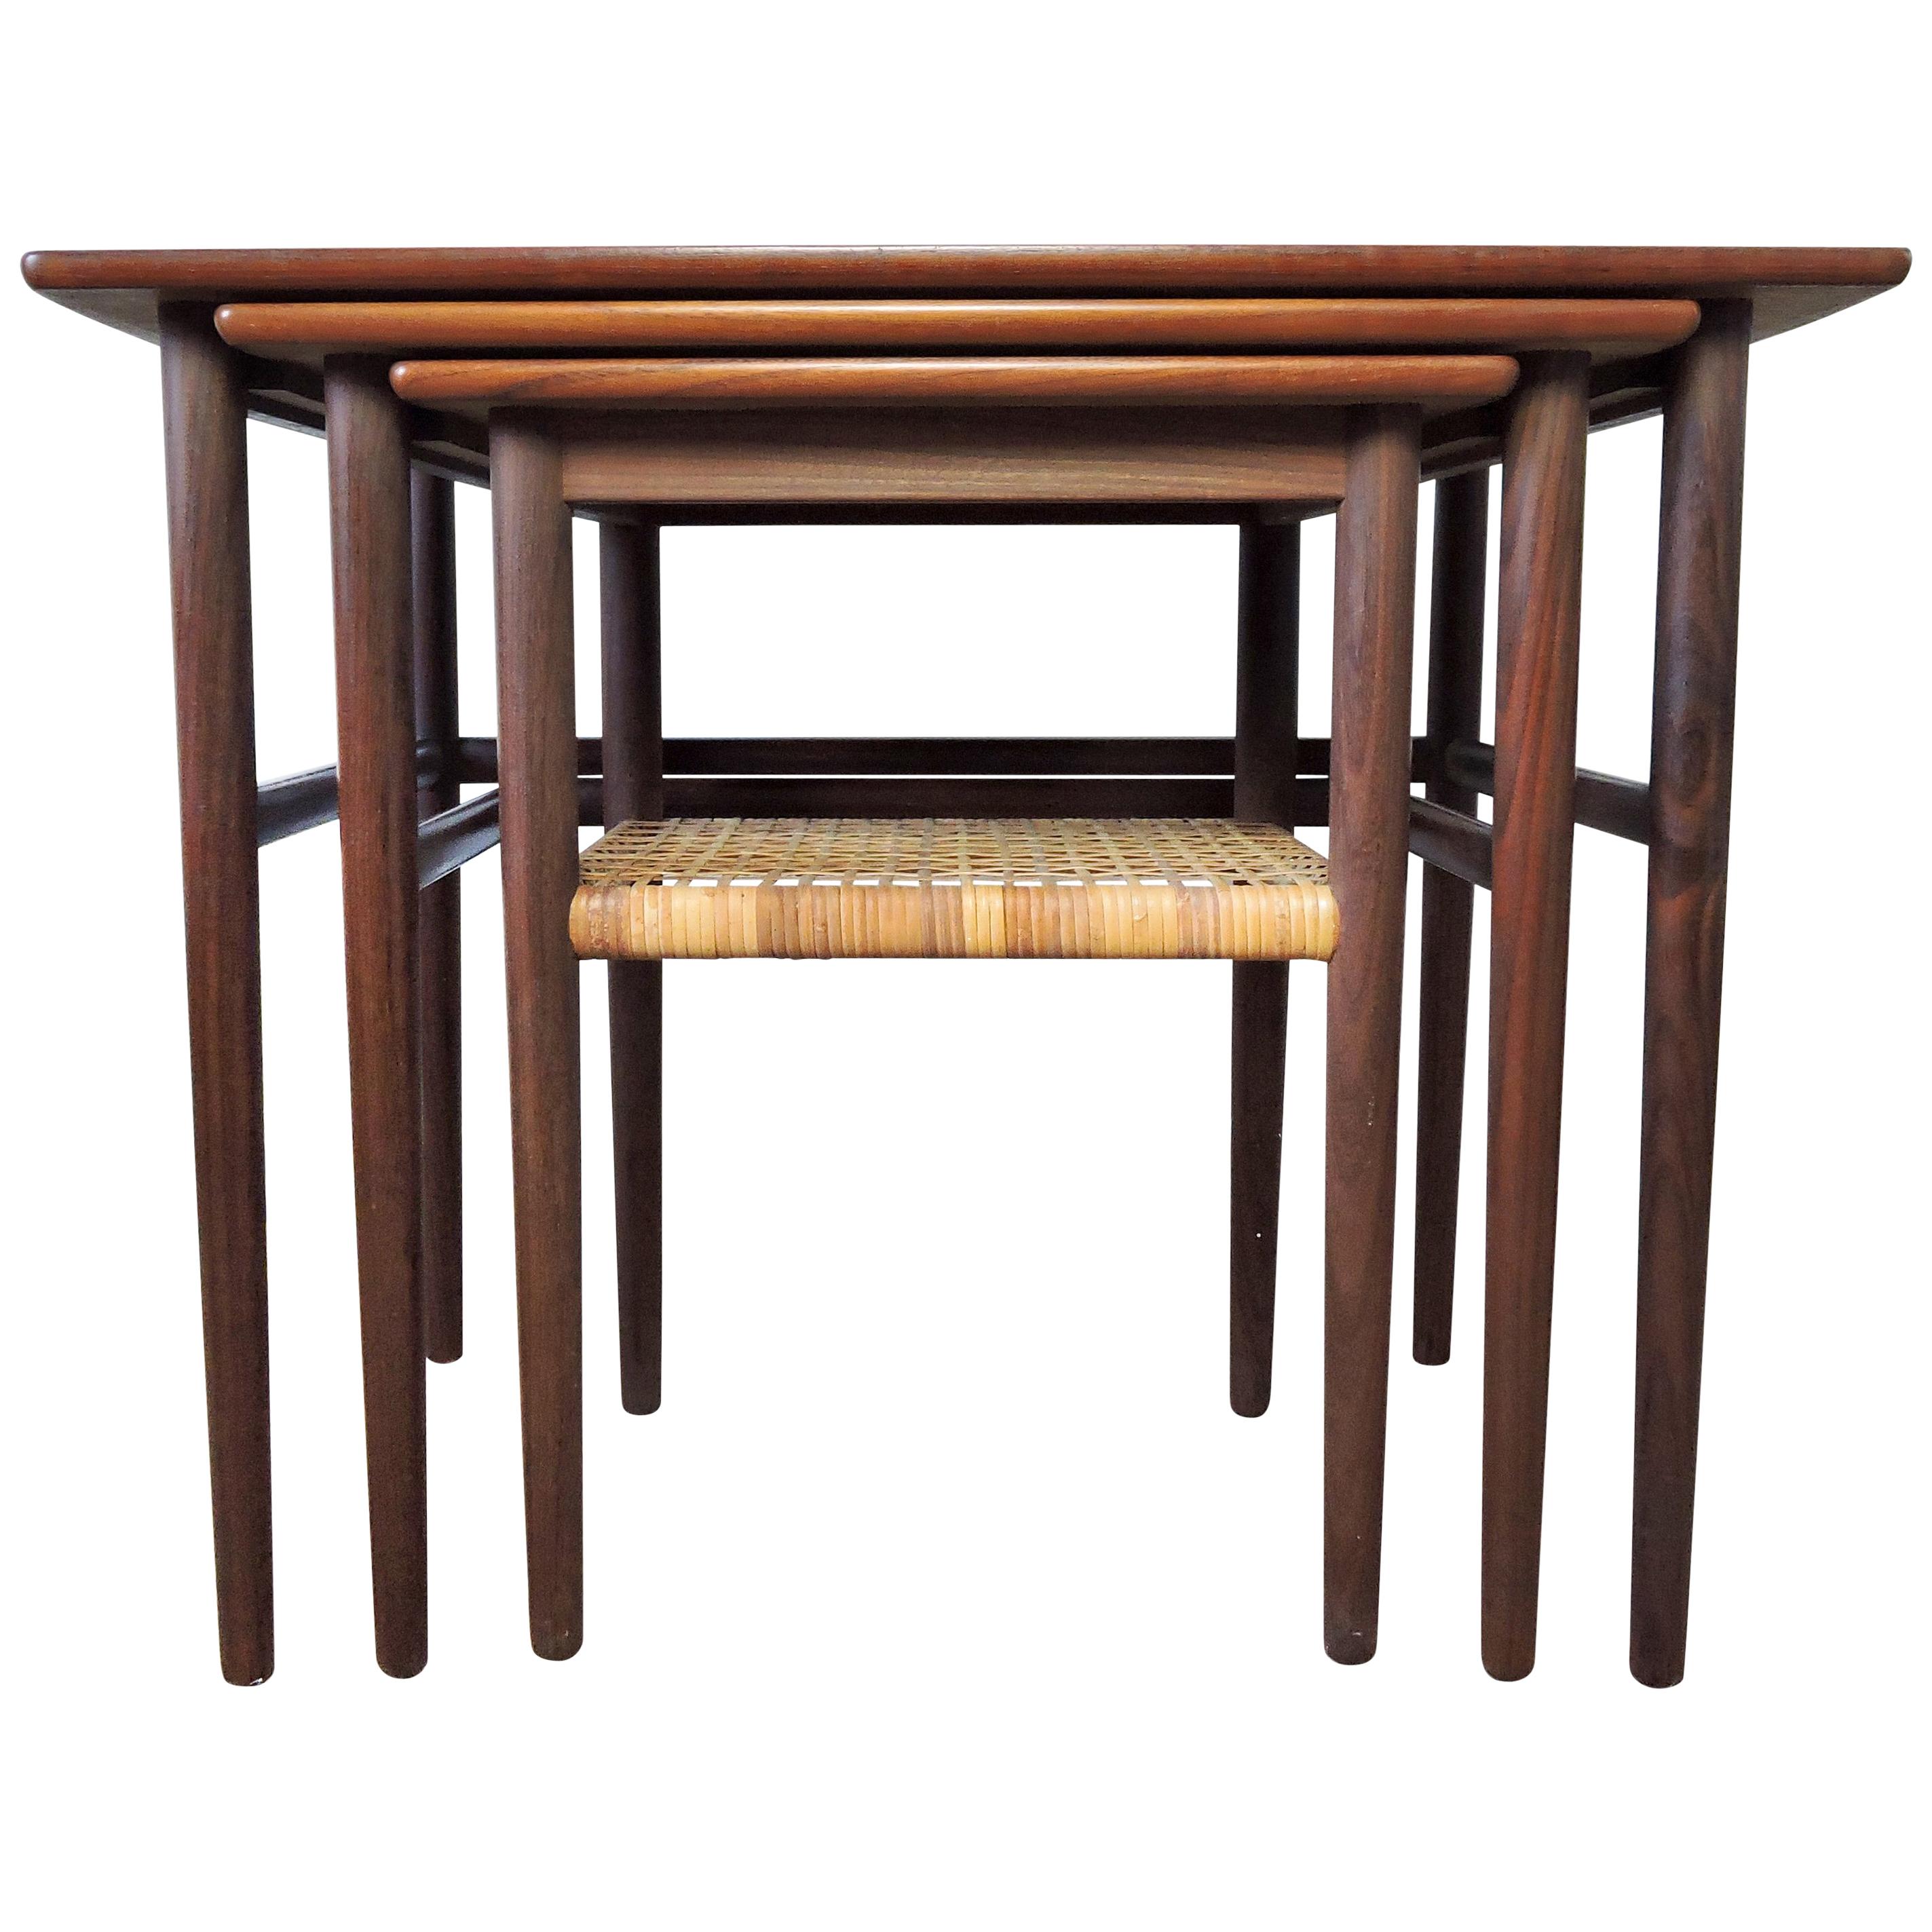 Midcentury Danish Teak and Cane Nesting Tables, 1950s For Sale